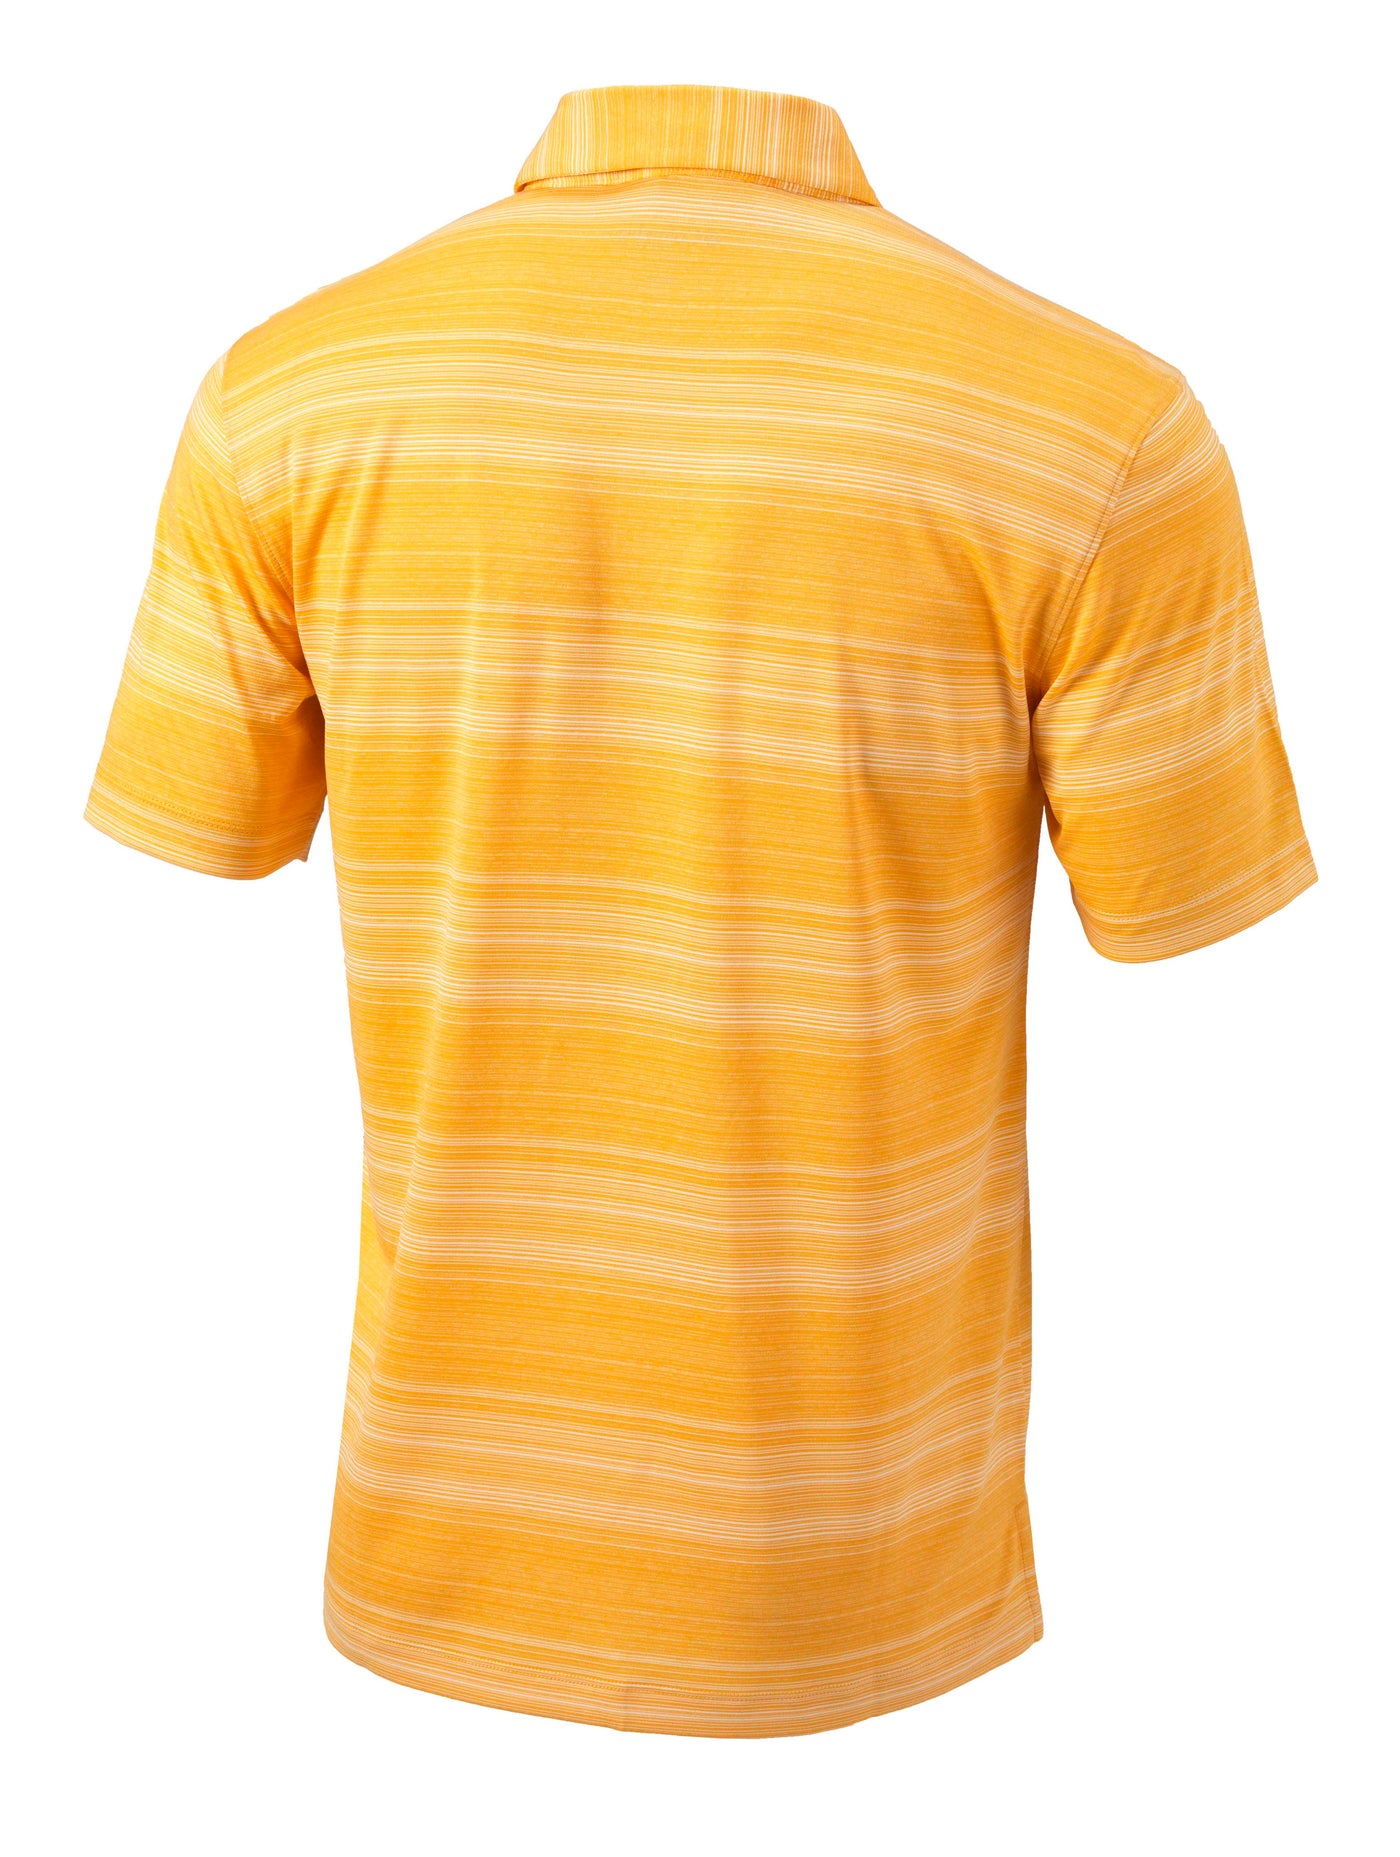 Back view of ASU gold and white striped polo